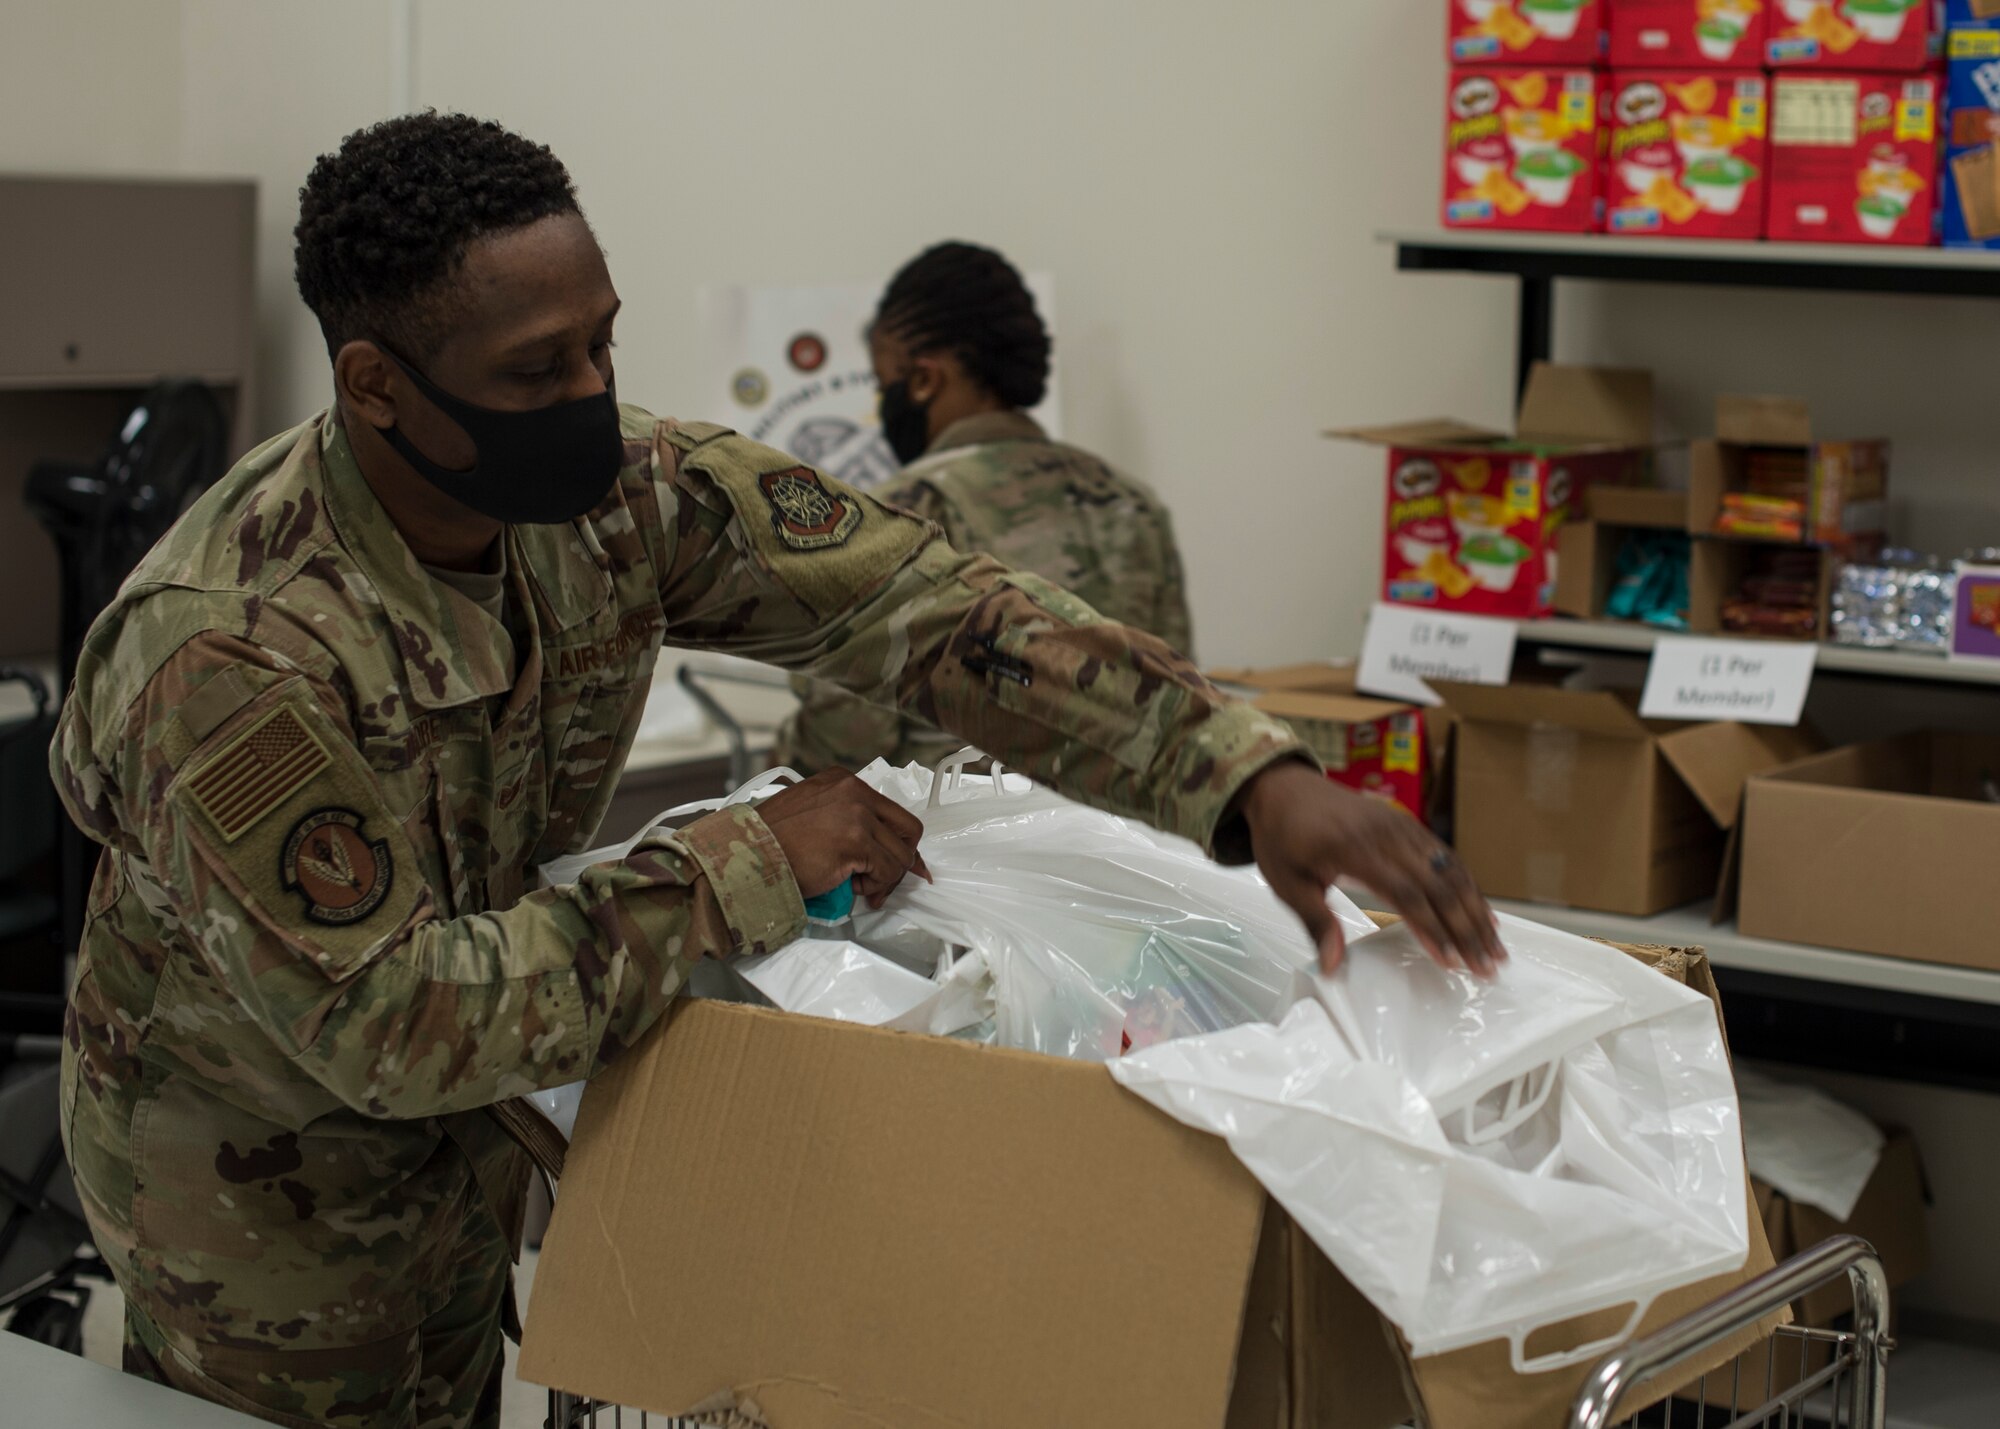 U.S. Air Force Staff Sgt. Tristan Traore, a 6th Force Support Squadron readiness NCO, sorts through care packages at the Military and Family Readiness Center (MFRC) at MacDill Air Force Base, Fla., April 17, 2020.